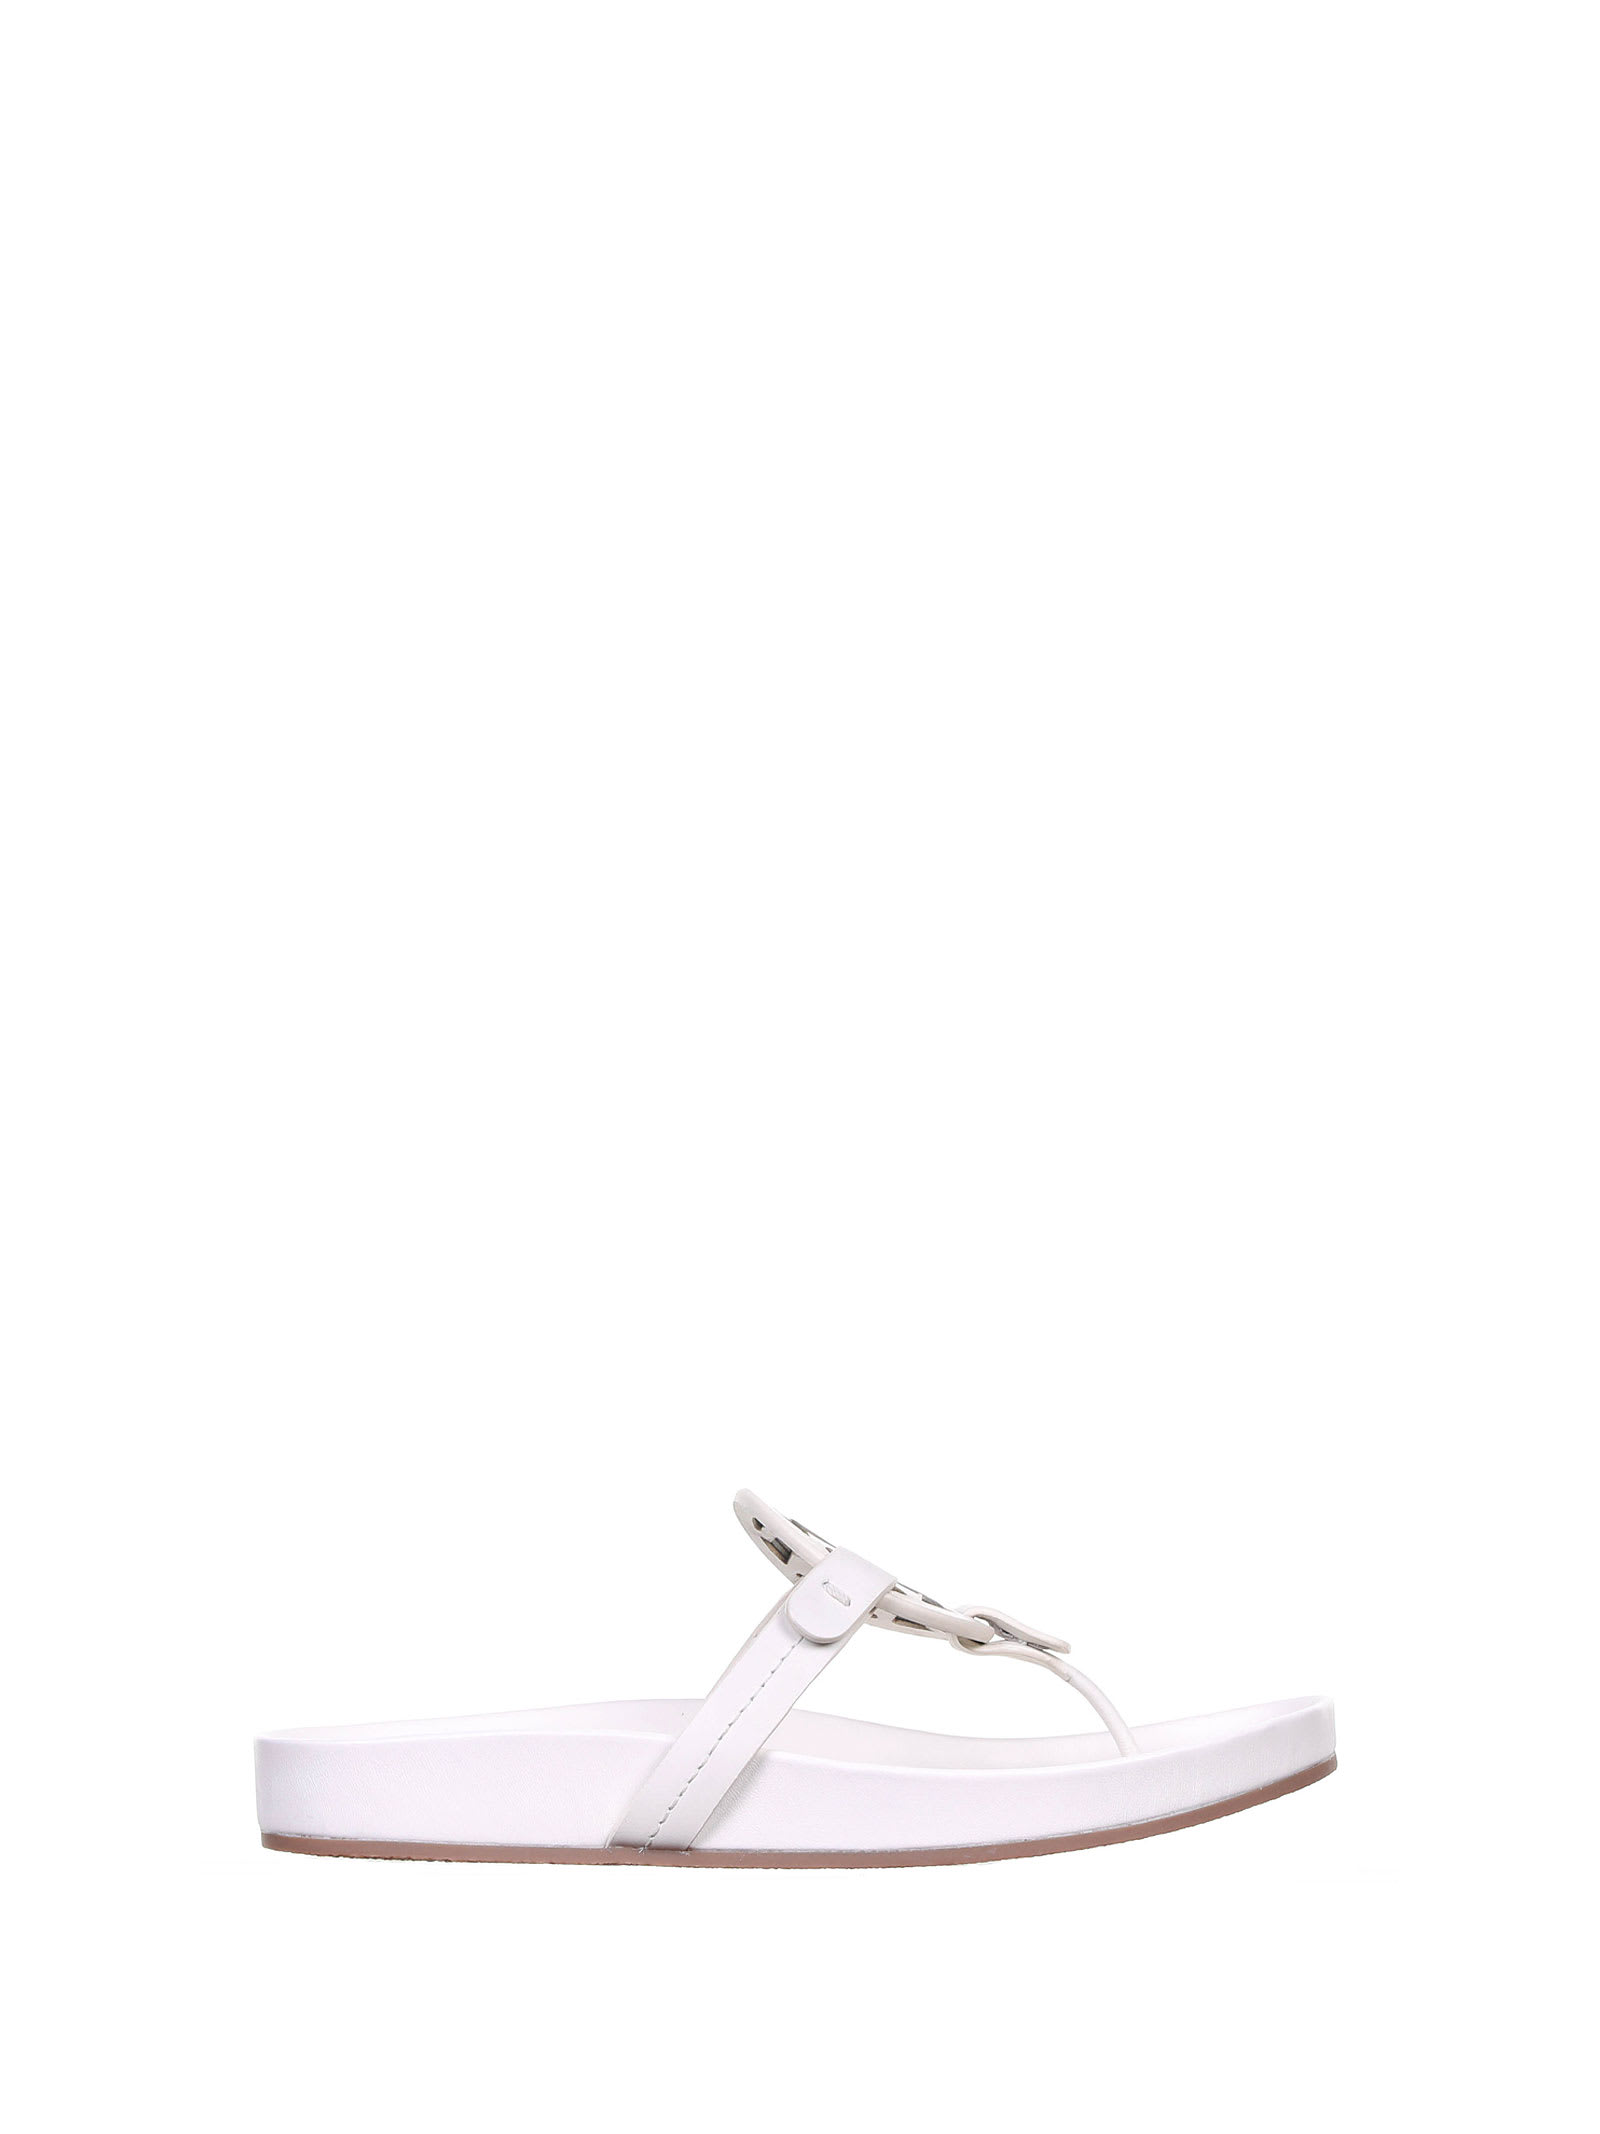 Tory Burch Miller Thong Sandals In New Ivory